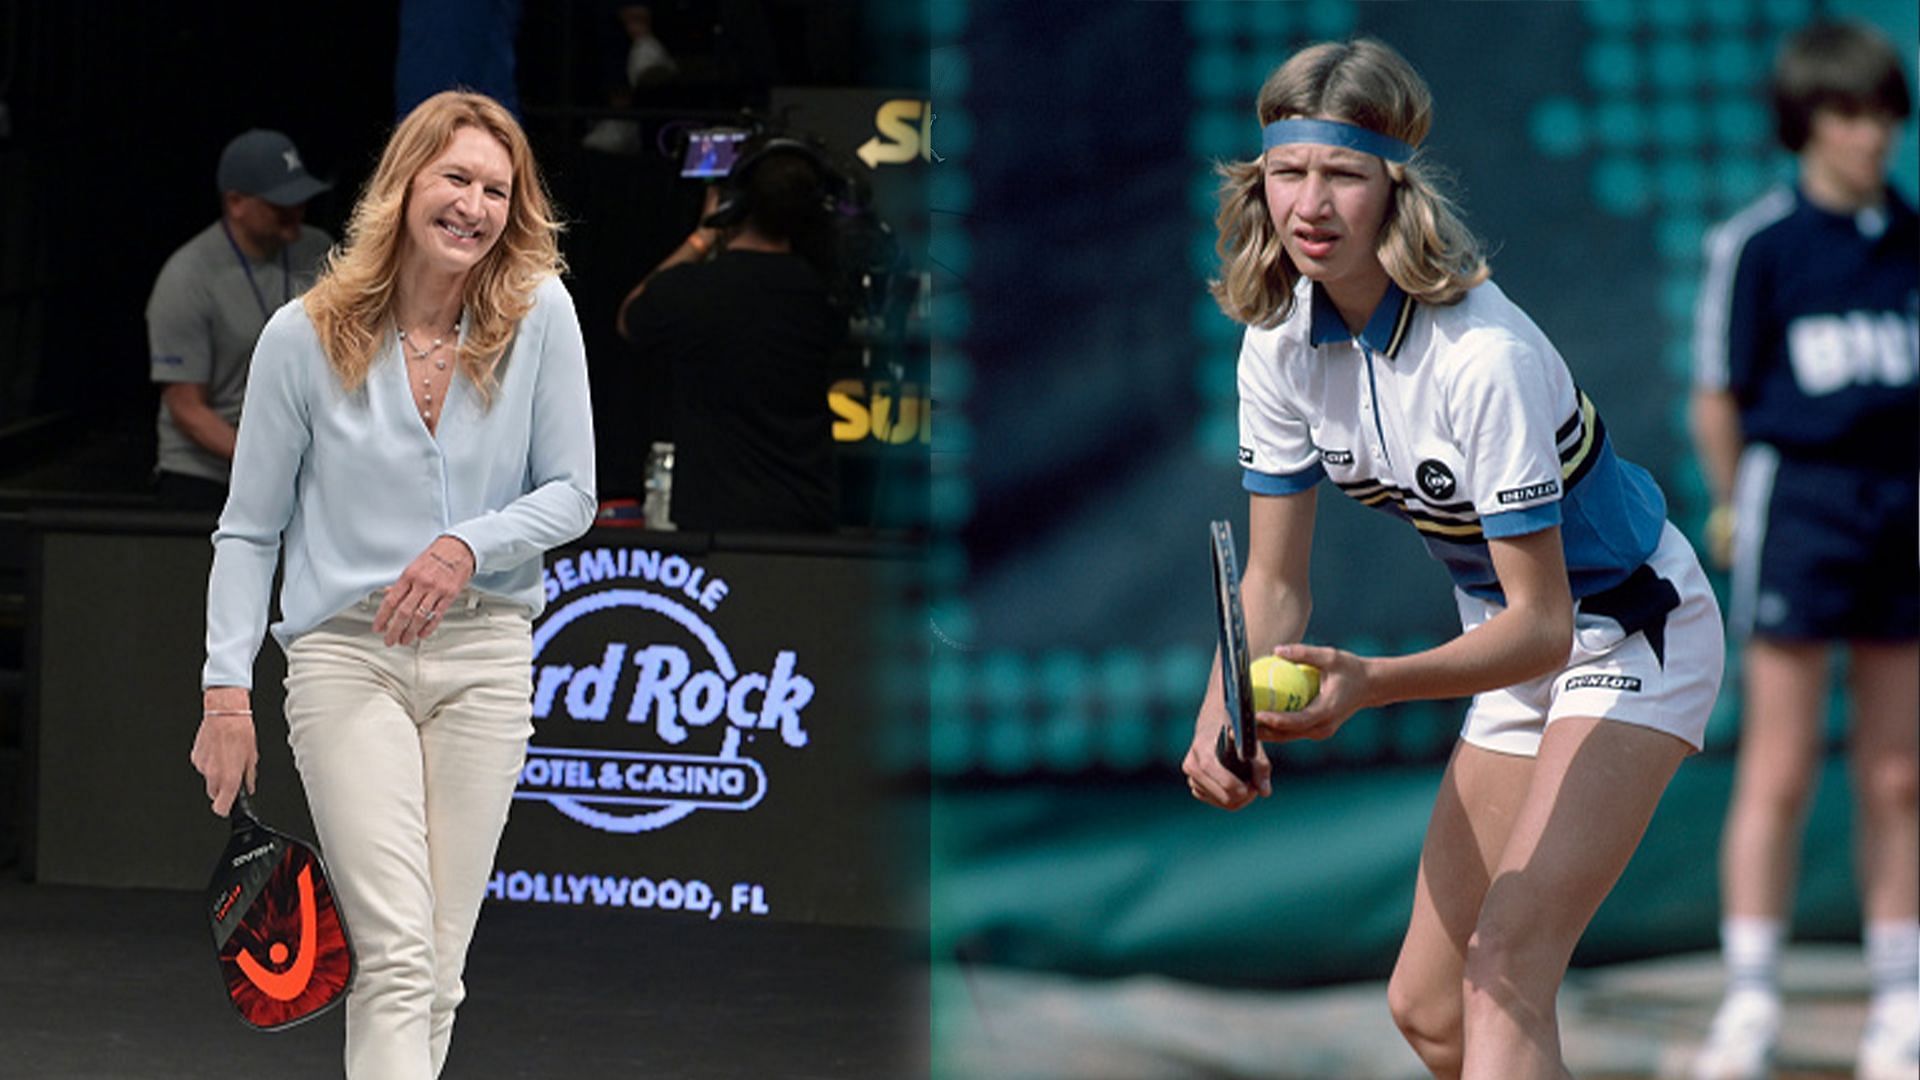 Steffi Graf is widely regarded as one of the all-time tennis greats. 